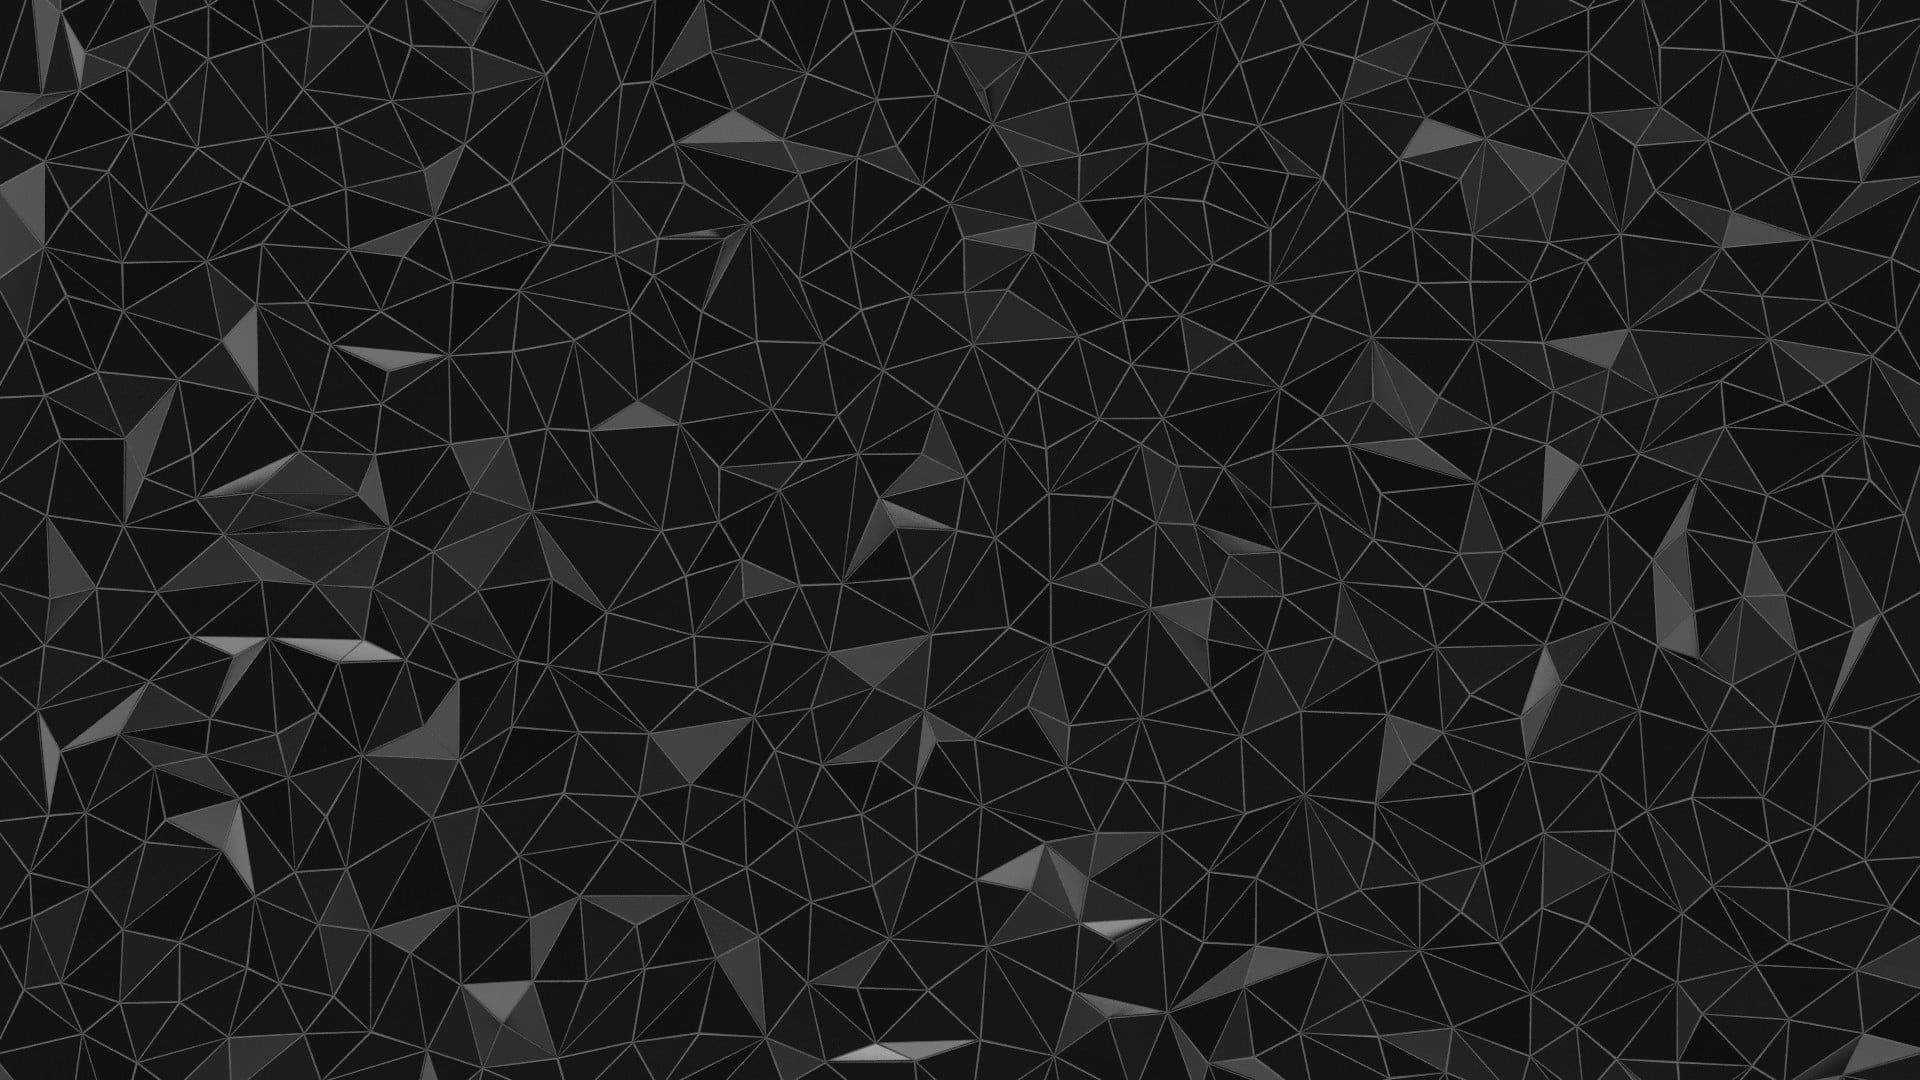 A black and white geometric pattern - Low poly